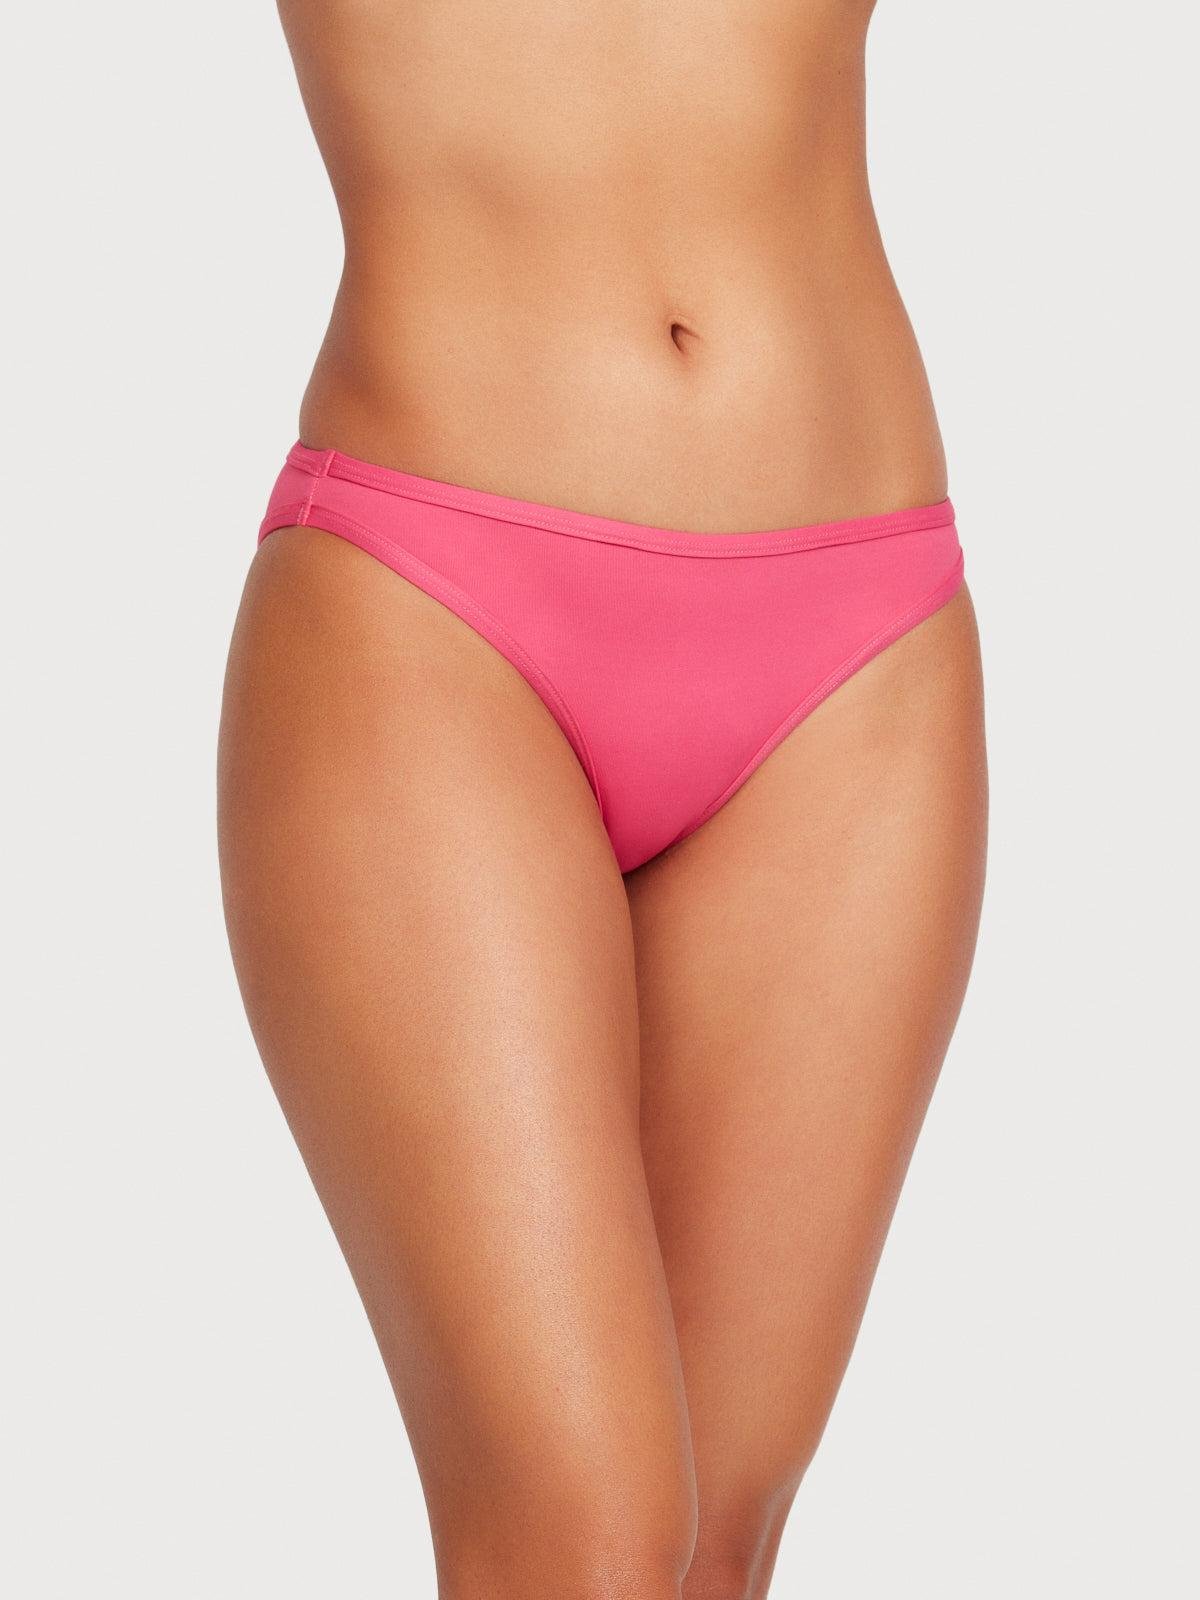 Classic Ruched Back Bikini Bottom in Raspberry Rose by FREDERICK'S OF HOLLYWOOD